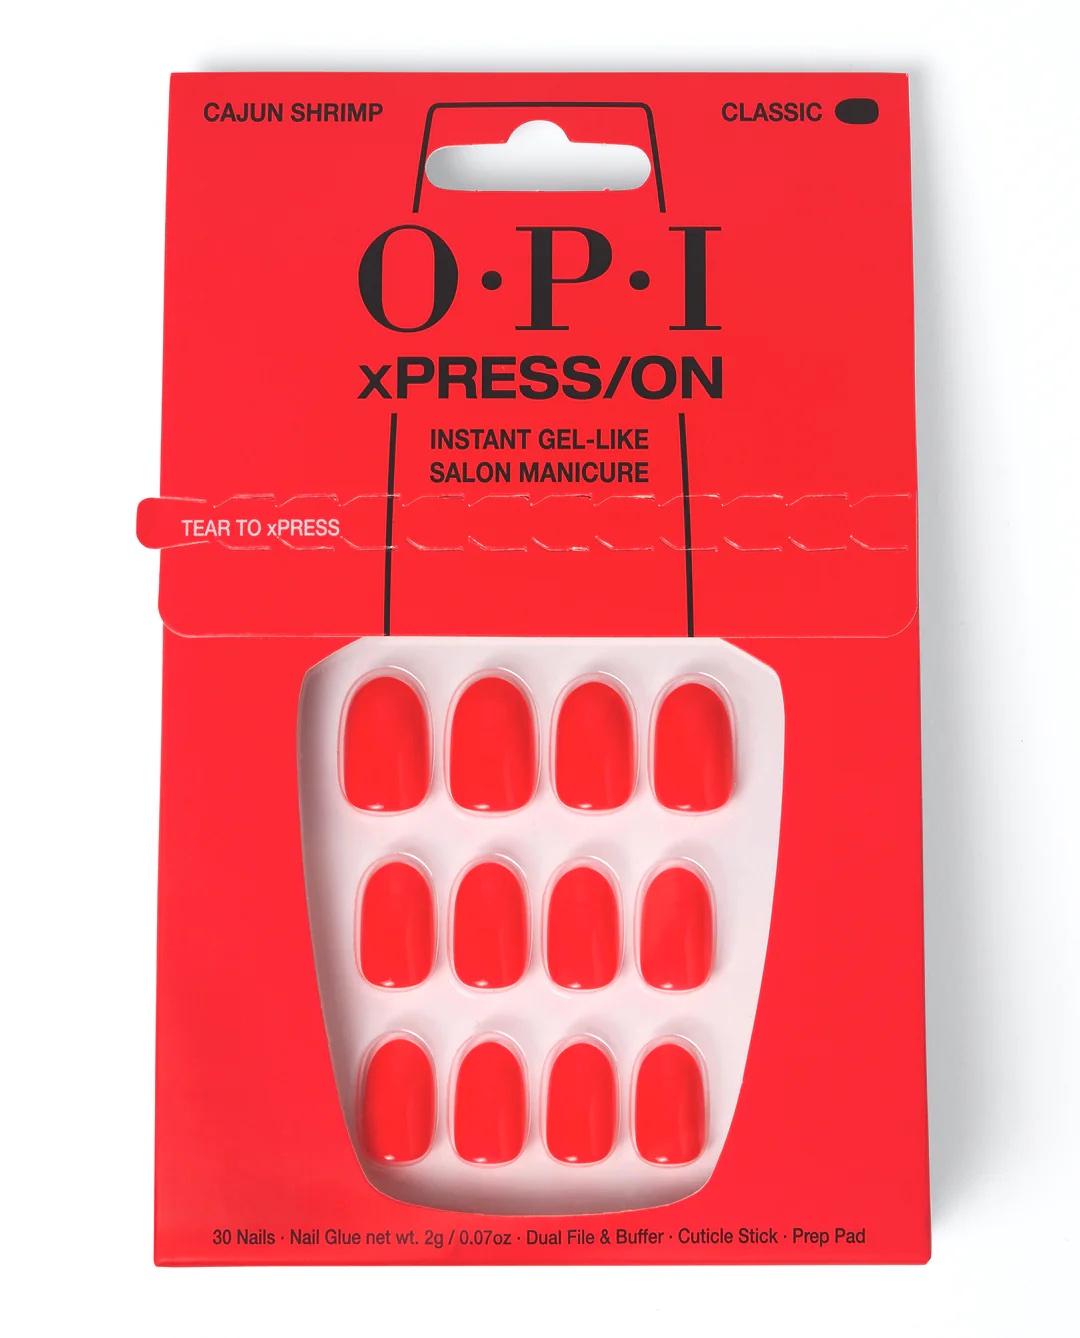 OPI Press-On Nails in orangey-red color